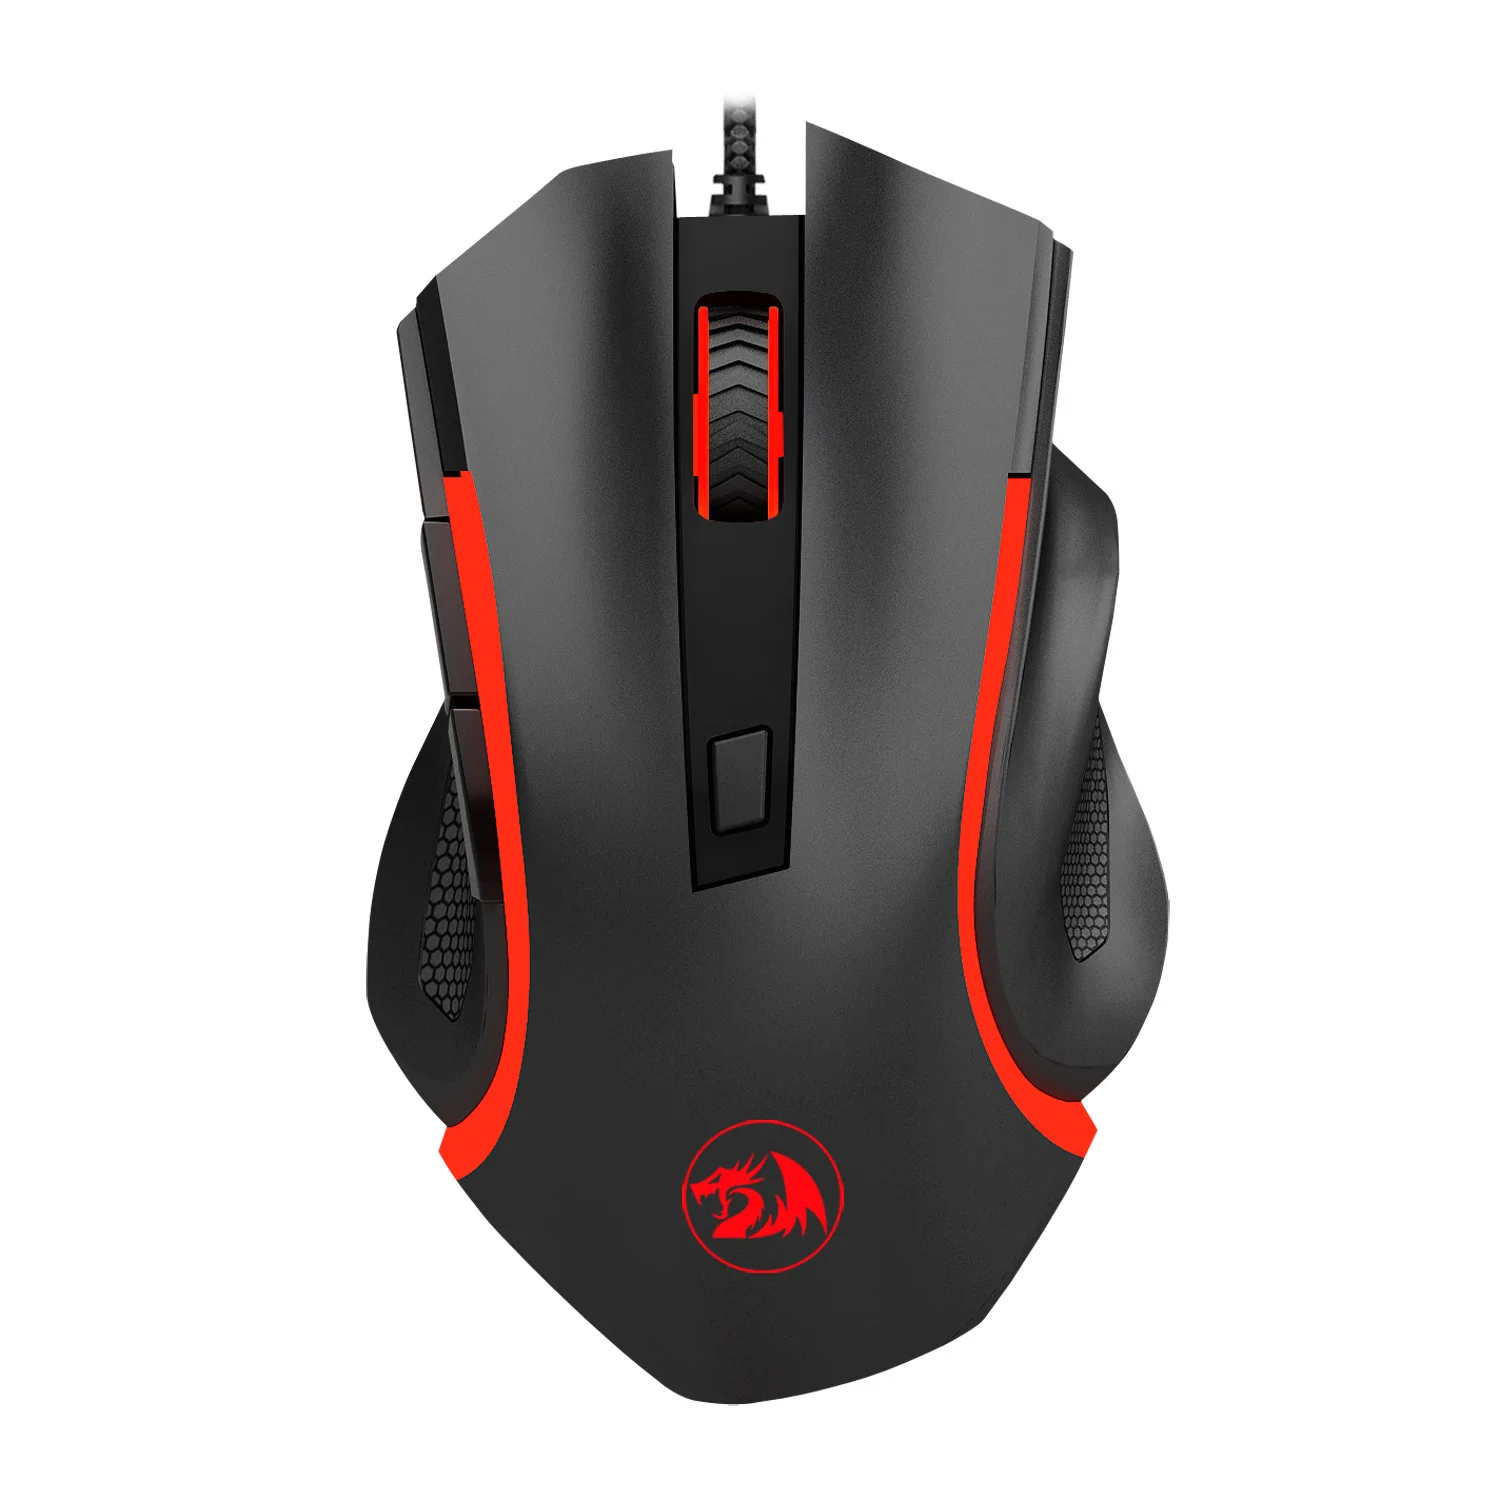 

Redragon M606 USB Wired MMO Gaming Mouse 8 buttons 7200 DPI LED RGB Backlit Ergonomic Design Programmable Mice for Gamer lol